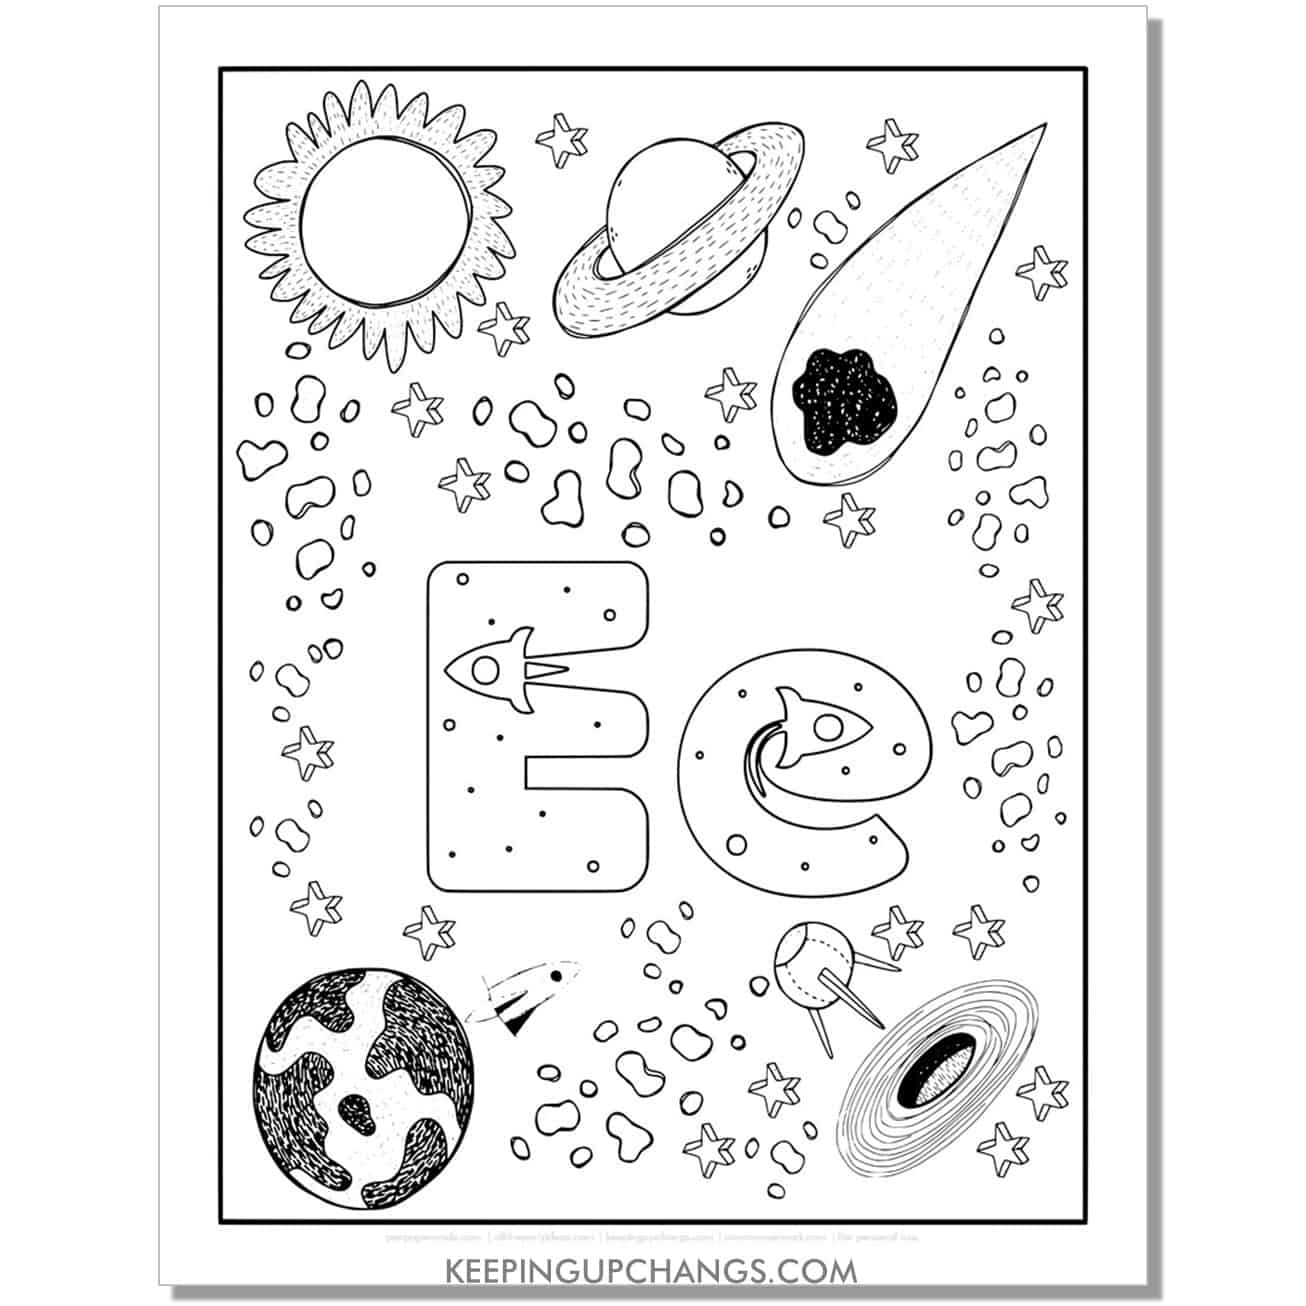 free alphabet letter e coloring page for kids with rockets, space theme.